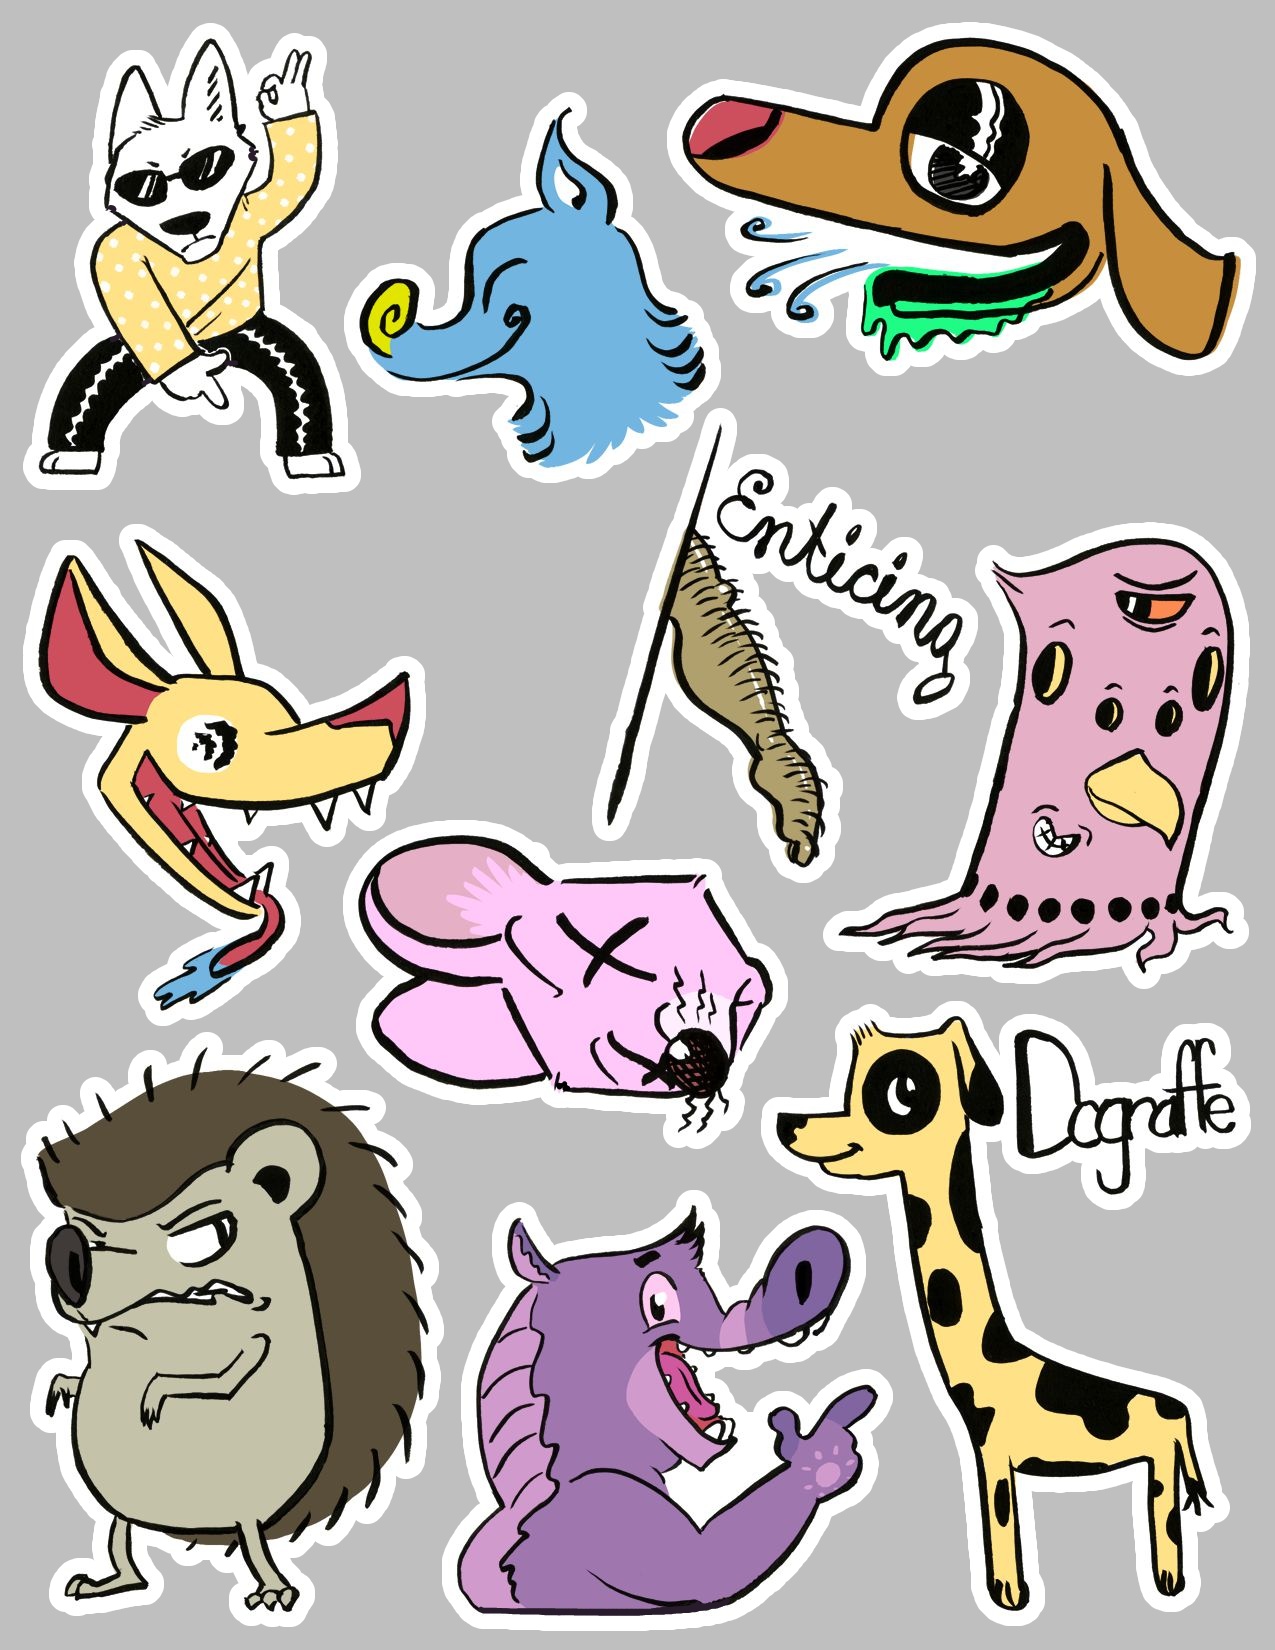 An assortment of ten different cartoon characters and designs with white space between them for cutting out as stickers.